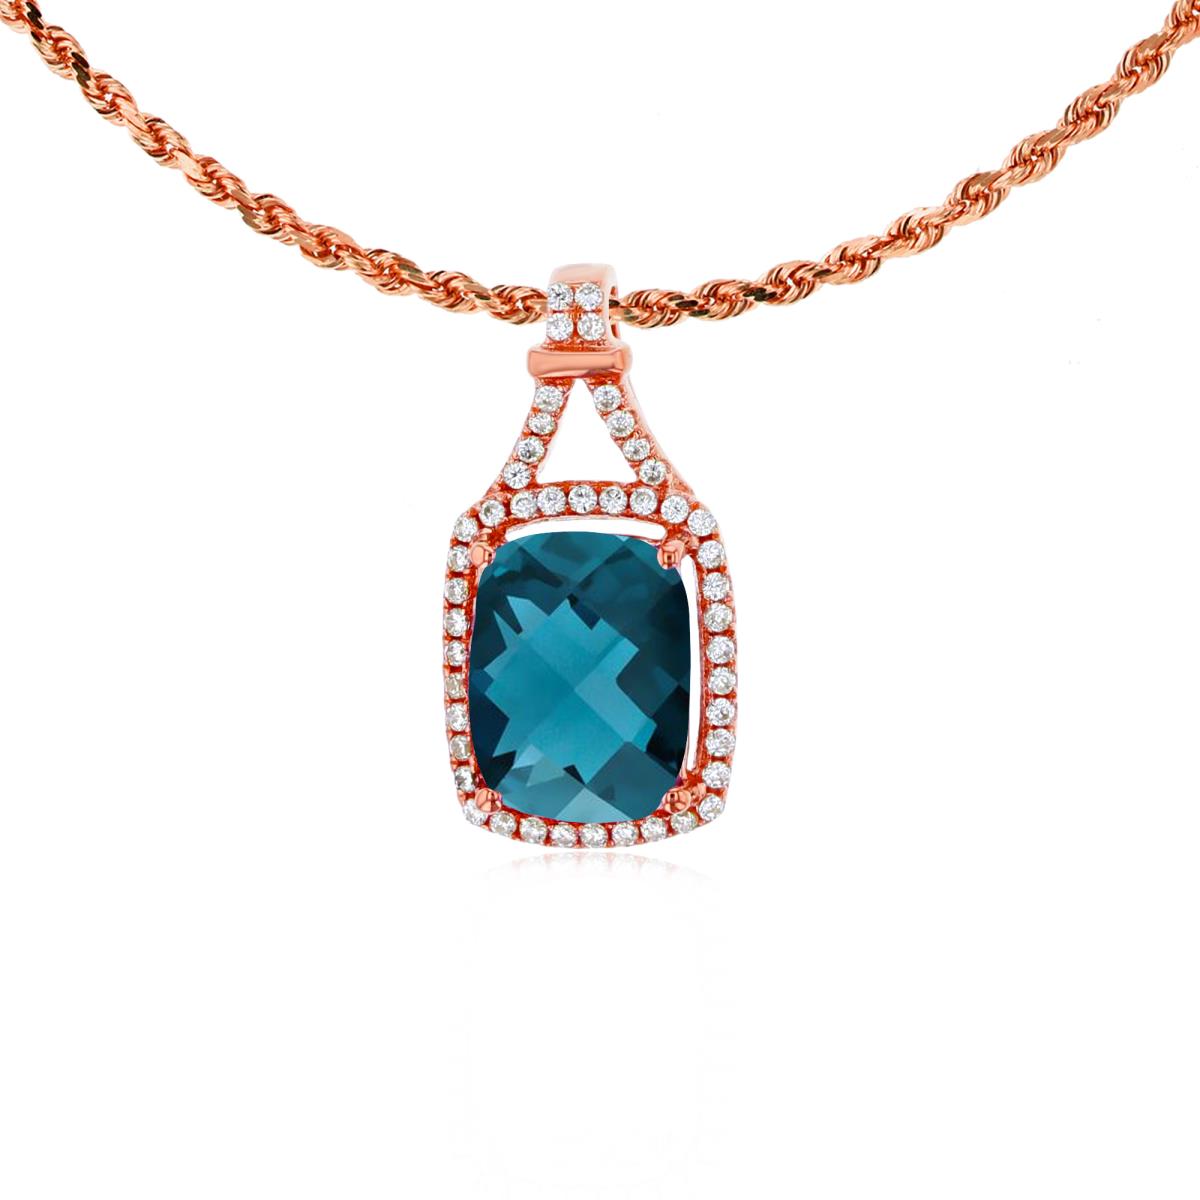 10K Rose Gold 8x6mm Cushion London Blue Topaz & 0.13 CTTW Rd Diamonds Halo 18" Rope Chain Necklace